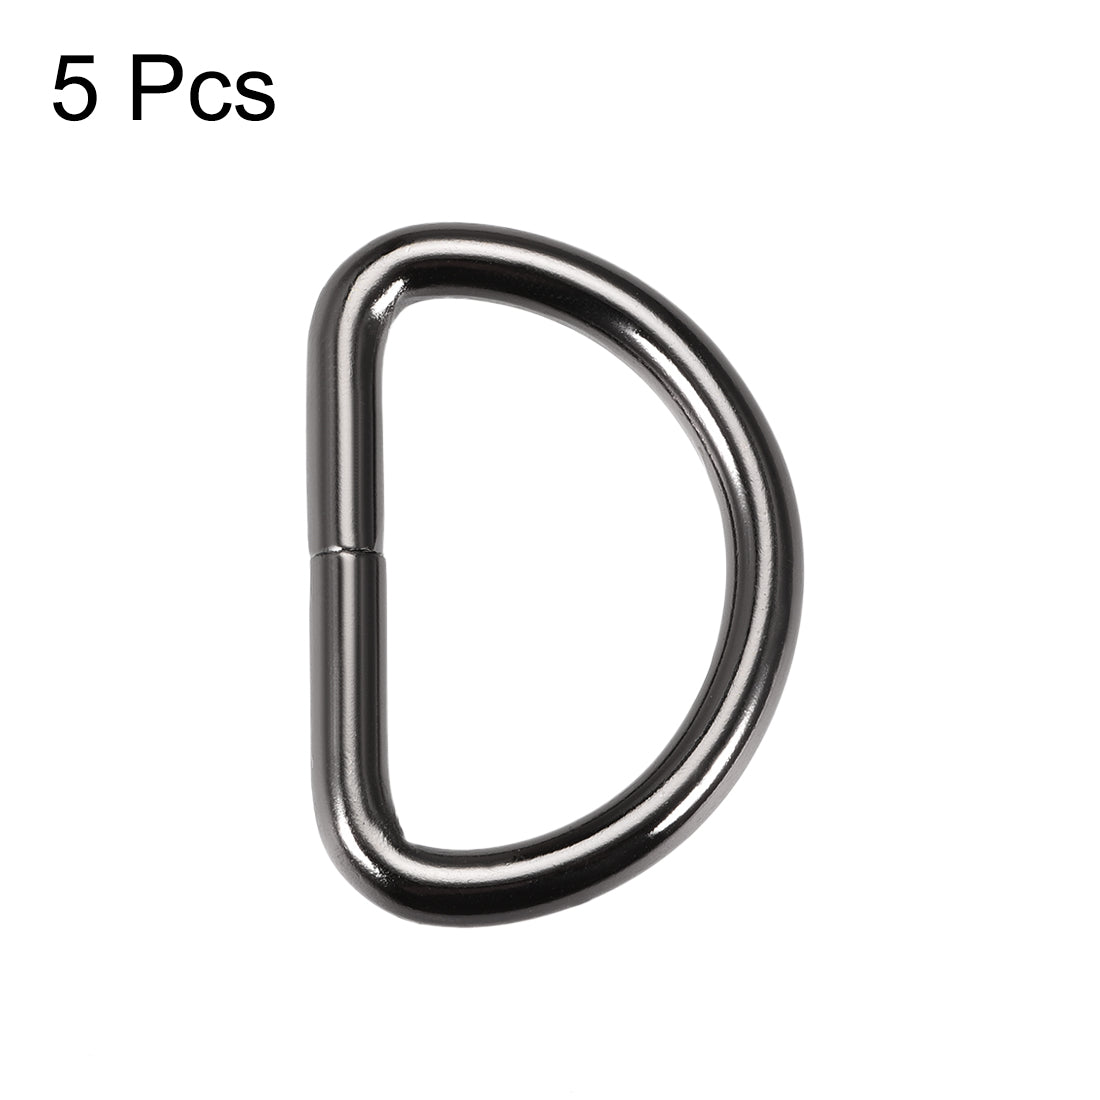 uxcell Uxcell 5 Pcs D Ring Buckle 1.26 Inch Metal Semi-Circular D-Rings Black for Hardware Bags Belts Craft DIY Accessories